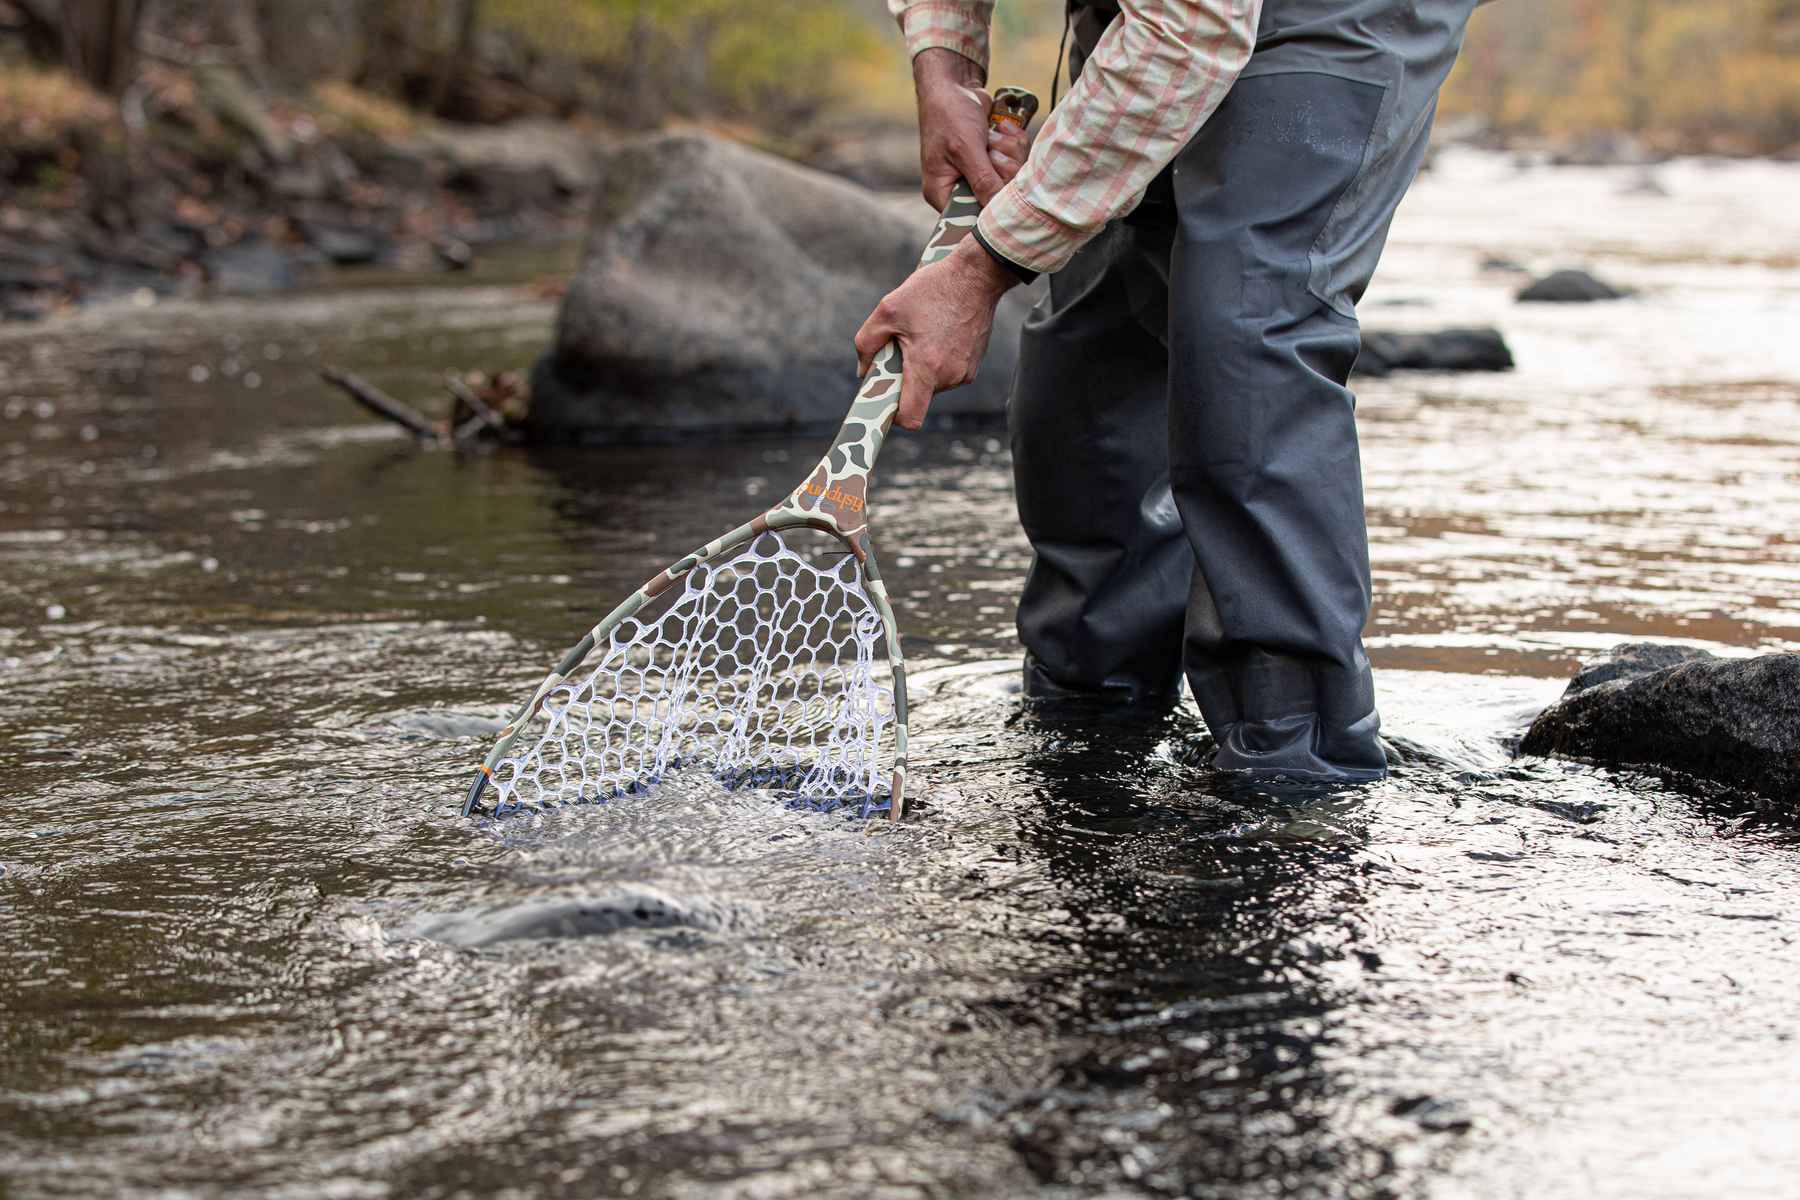 5 fishing nets that should be on your wish list